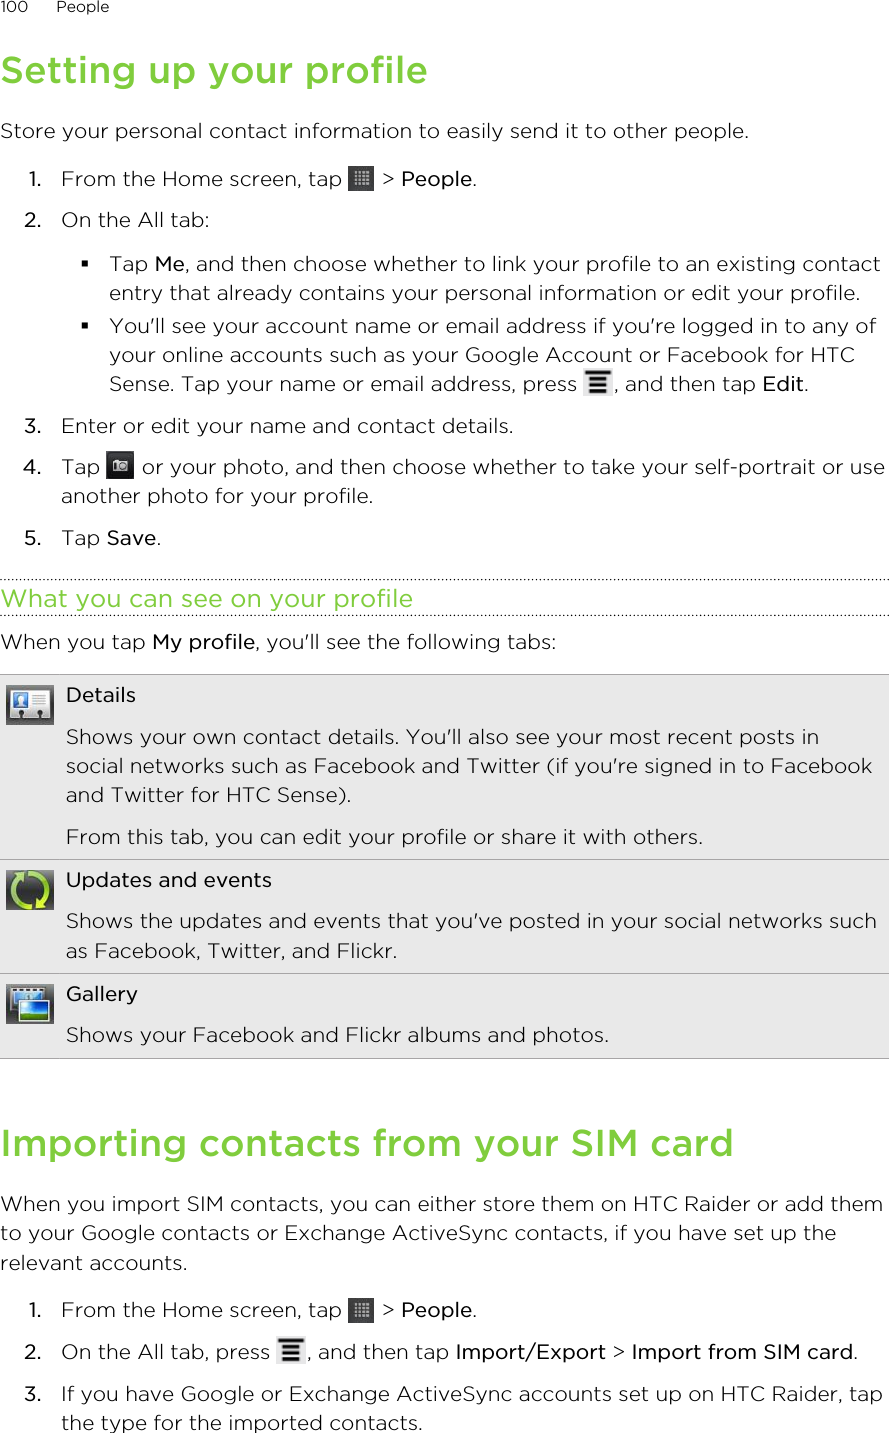 Setting up your profileStore your personal contact information to easily send it to other people.1. From the Home screen, tap   &gt; People.2. On the All tab:§Tap Me, and then choose whether to link your profile to an existing contactentry that already contains your personal information or edit your profile.§You&apos;ll see your account name or email address if you&apos;re logged in to any ofyour online accounts such as your Google Account or Facebook for HTCSense. Tap your name or email address, press  , and then tap Edit.3. Enter or edit your name and contact details.4. Tap   or your photo, and then choose whether to take your self-portrait or useanother photo for your profile.5. Tap Save.What you can see on your profileWhen you tap My profile, you&apos;ll see the following tabs:DetailsShows your own contact details. You&apos;ll also see your most recent posts insocial networks such as Facebook and Twitter (if you&apos;re signed in to Facebookand Twitter for HTC Sense).From this tab, you can edit your profile or share it with others.Updates and eventsShows the updates and events that you&apos;ve posted in your social networks suchas Facebook, Twitter, and Flickr.GalleryShows your Facebook and Flickr albums and photos.Importing contacts from your SIM cardWhen you import SIM contacts, you can either store them on HTC Raider or add themto your Google contacts or Exchange ActiveSync contacts, if you have set up therelevant accounts.1. From the Home screen, tap   &gt; People.2. On the All tab, press  , and then tap Import/Export &gt; Import from SIM card.3. If you have Google or Exchange ActiveSync accounts set up on HTC Raider, tapthe type for the imported contacts.100 People